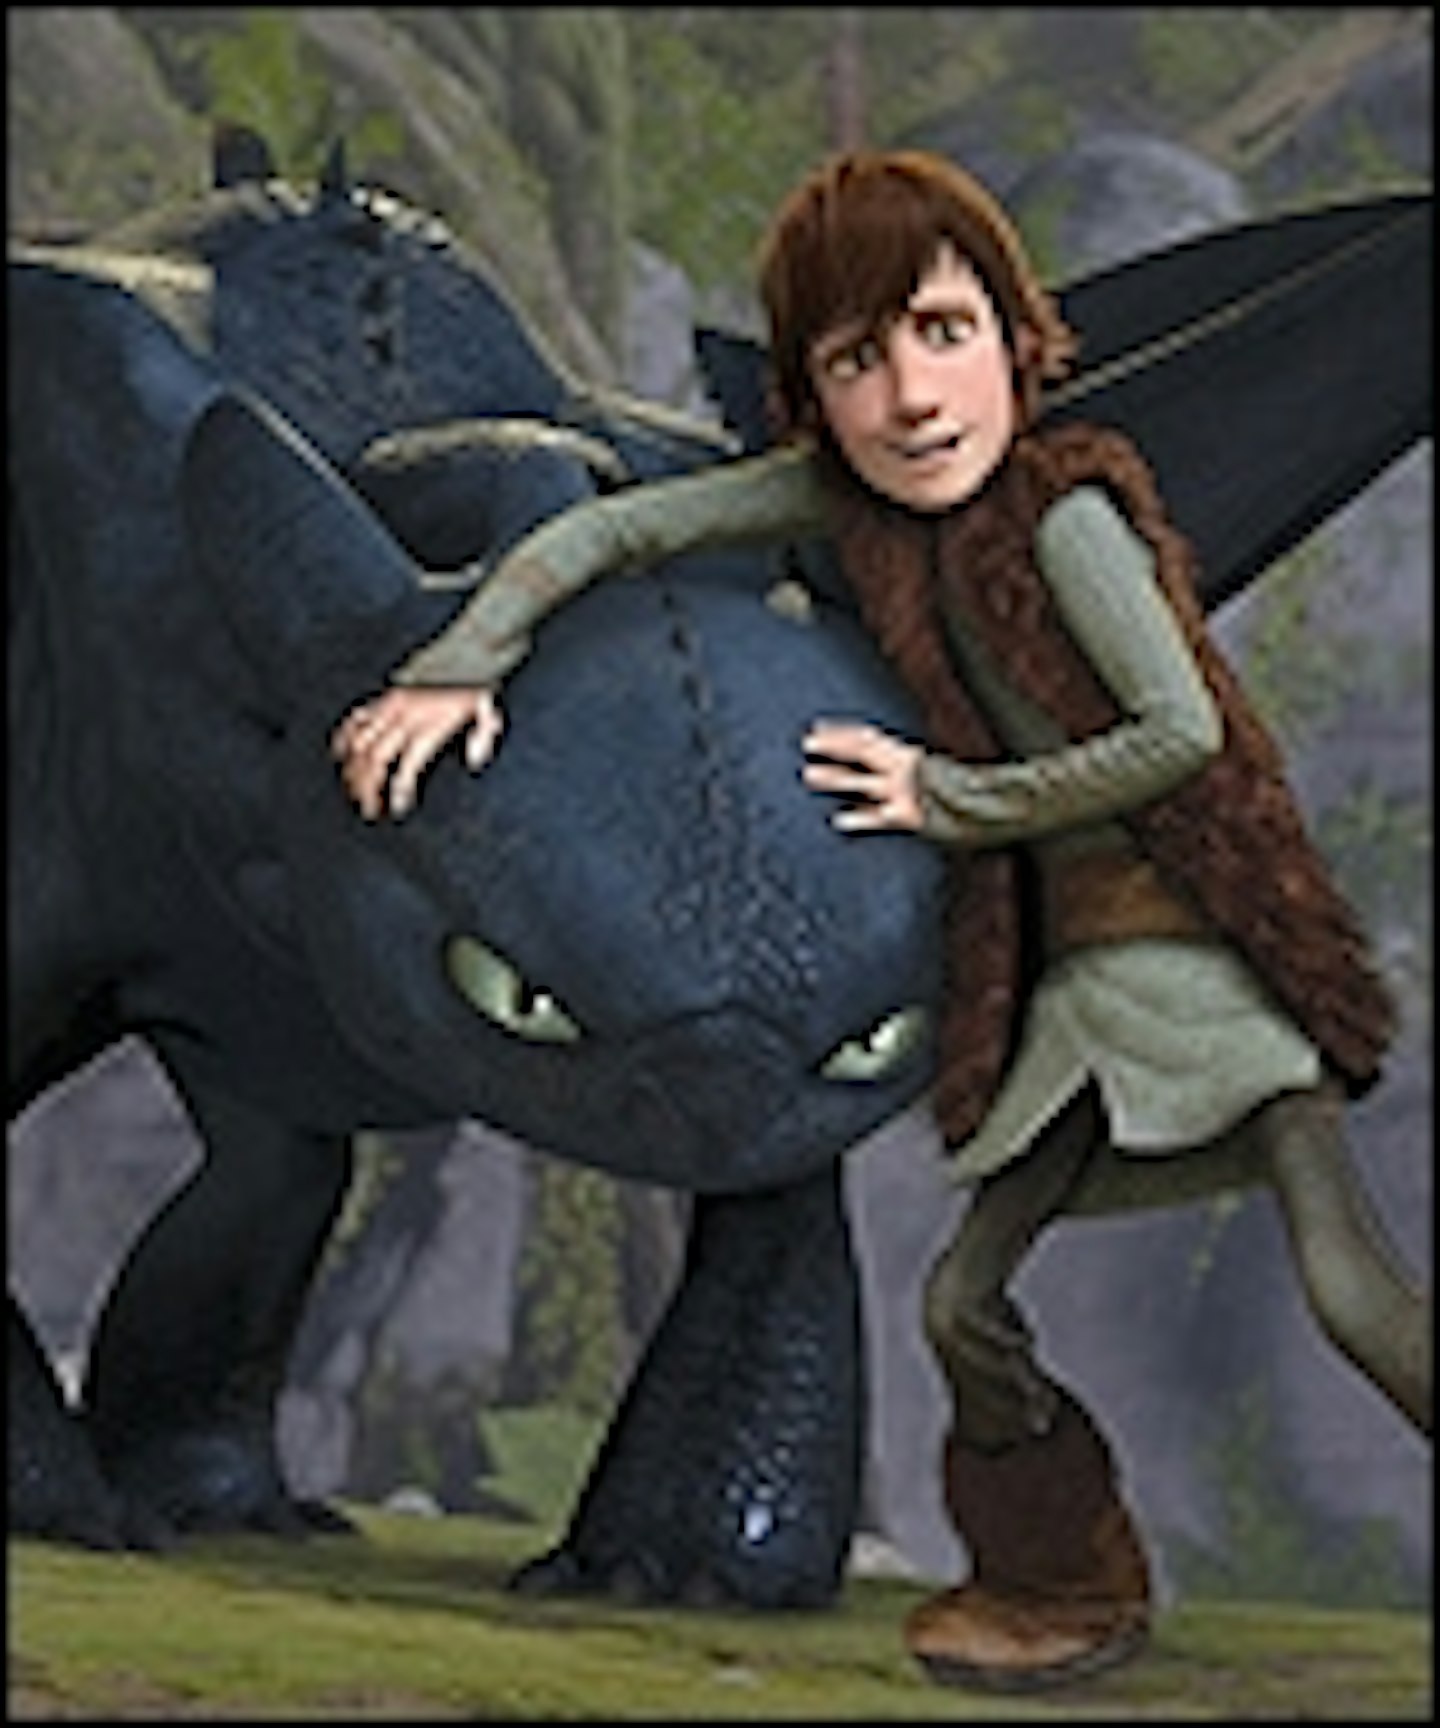 How To Train Your Dragon 2 News